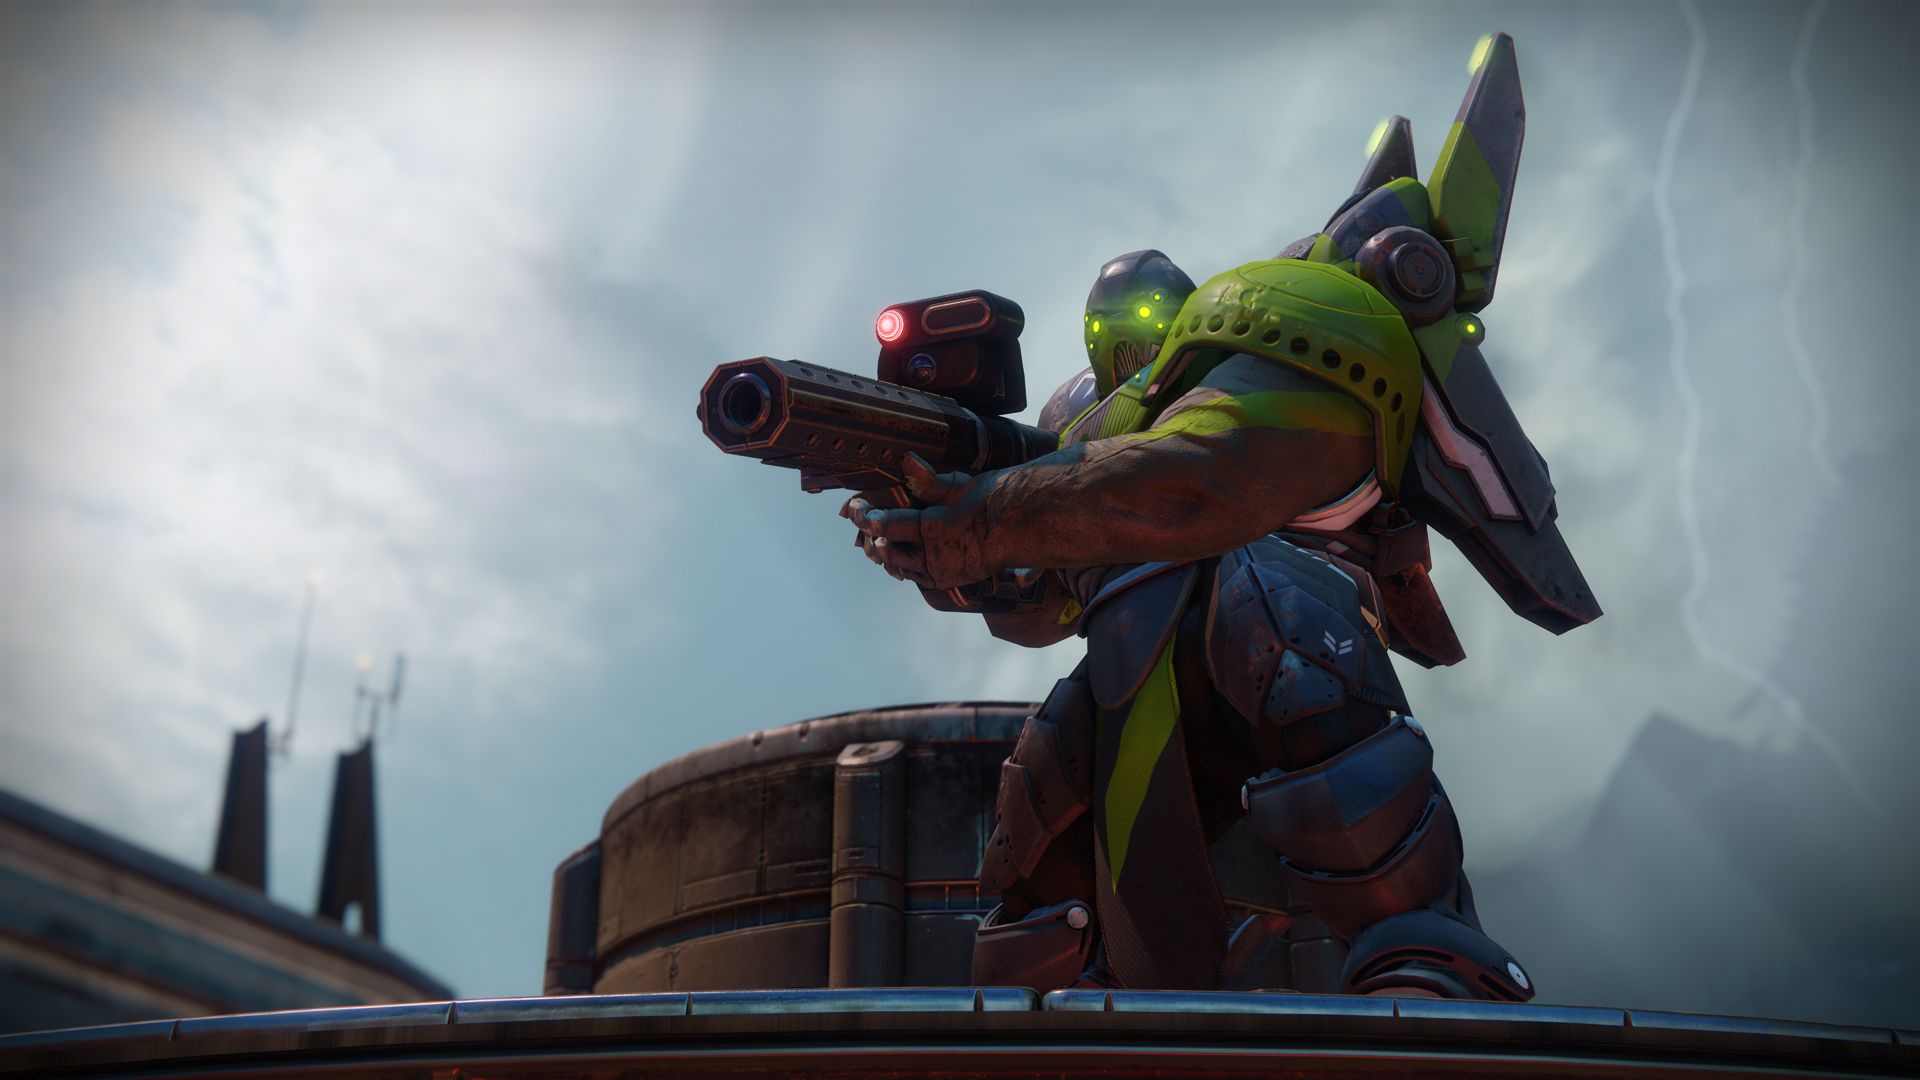 Destiny 2's Bracus Zhan in Lightfall's refresh of the Arms Dealer Strike. They wear green armor and hold a Cabal sniper rifle.